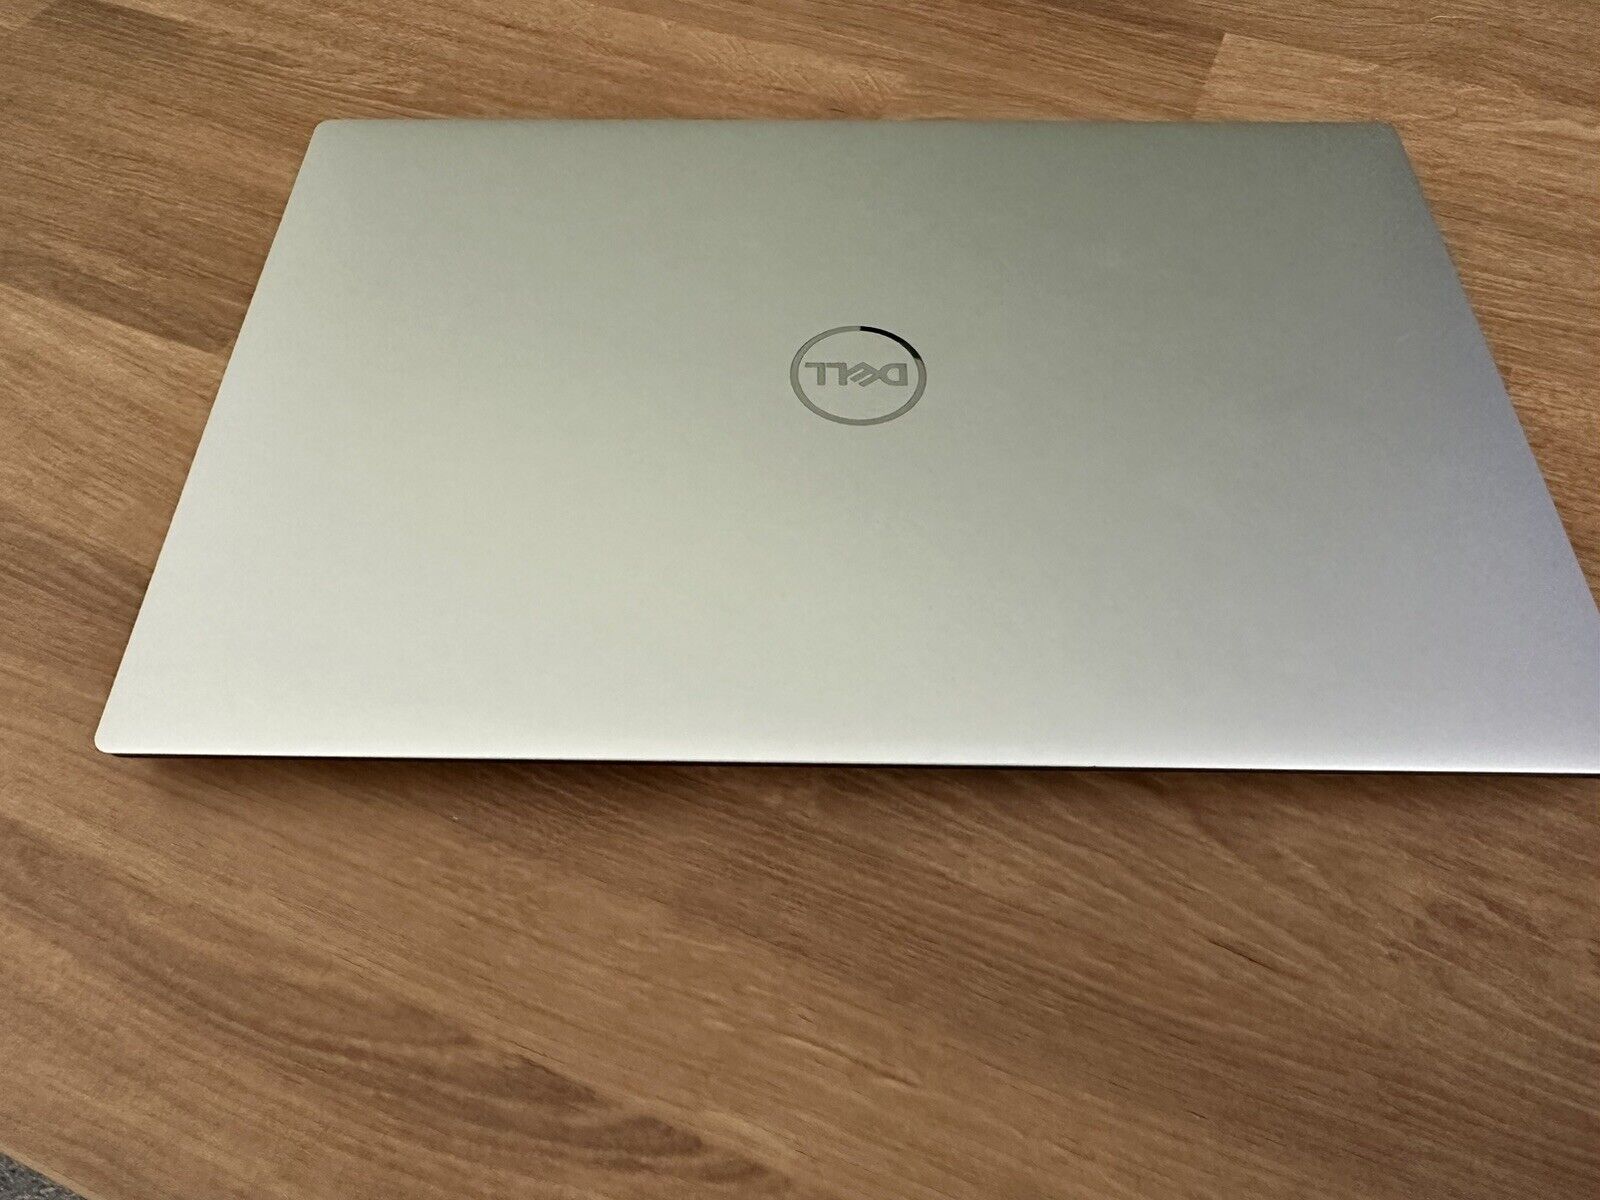 Dell XPS 13 9310 13.4 inch (512GB, Intel Core i7-1195G7, 4.8GHz, 16GB) Laptop